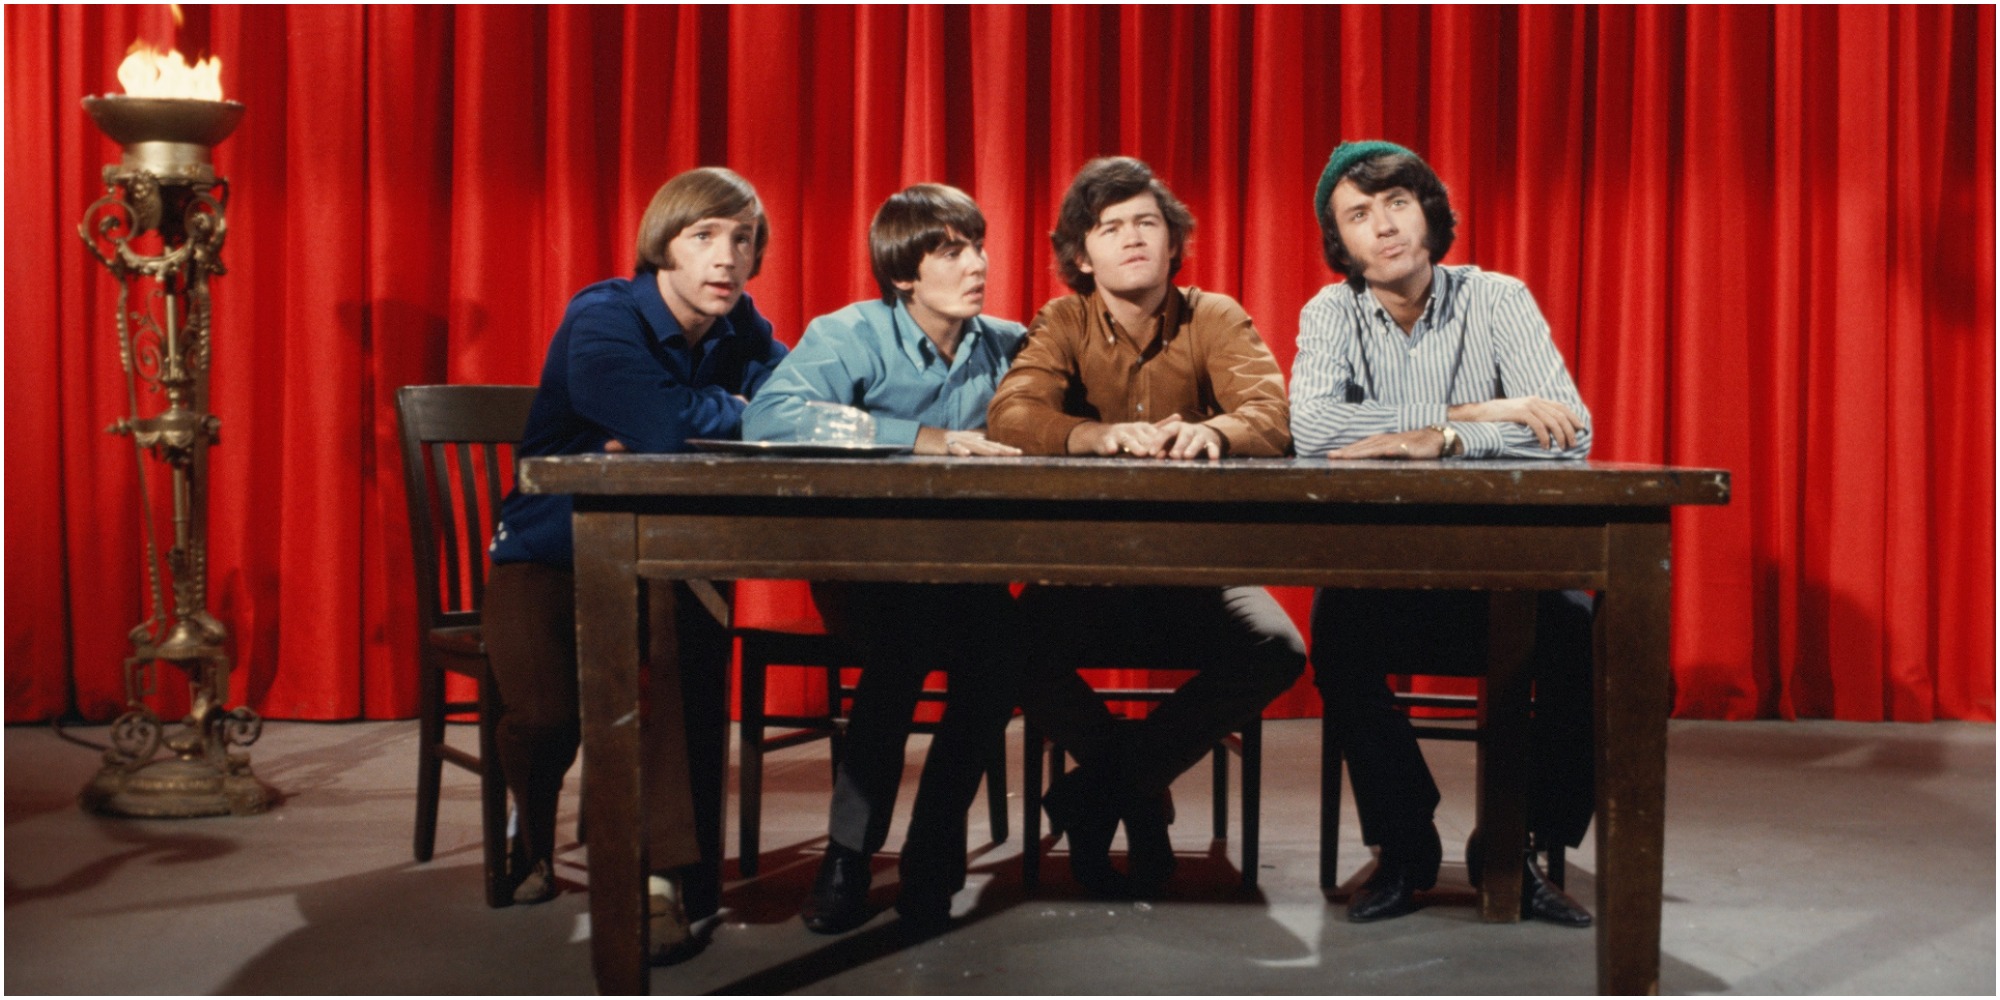 The Monkkes pose in front of a red curtain in the episode "The Devil and Peter Tork."